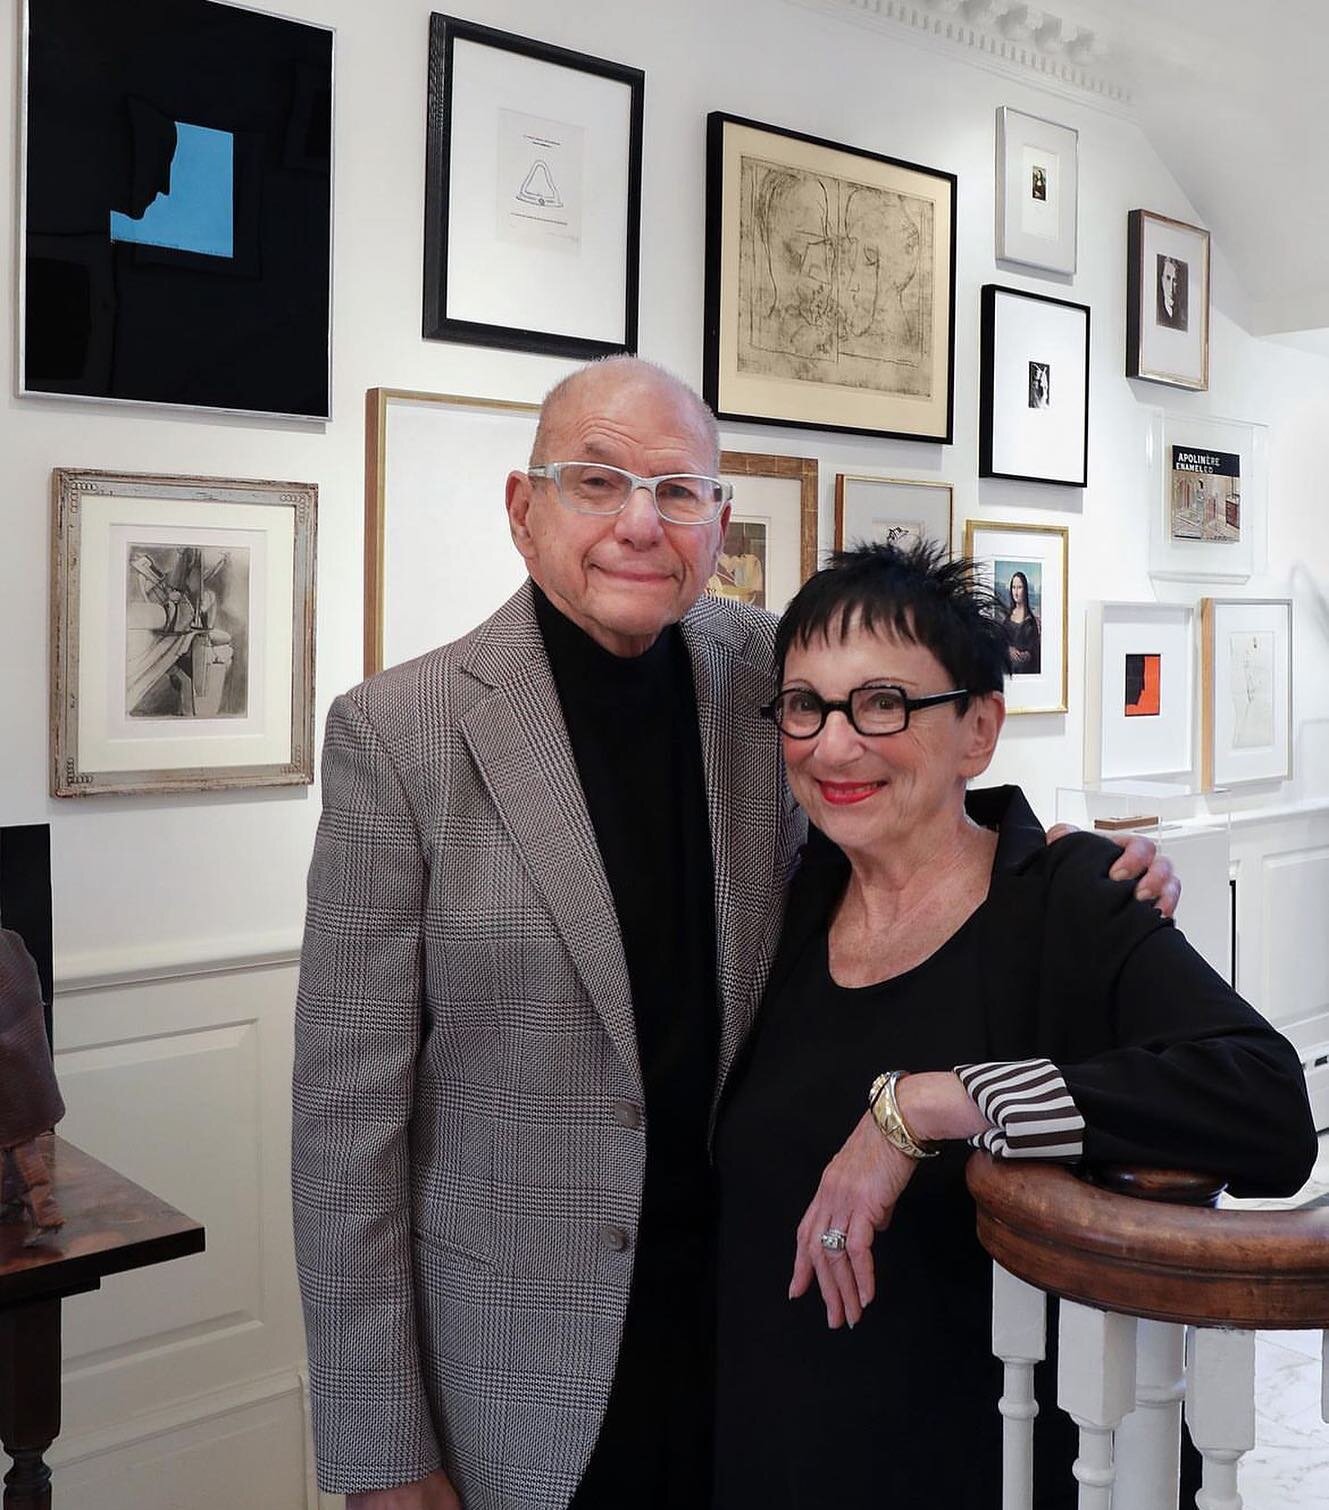 So sad to lose Aaron Levine today. He, and his wife Barbara, were obsessed with Marcel Duchamp&mdash;Collecting his art and even traveling to his grave site in Rouen. Aaron always had a quip but he was most animated when talking about art and artists